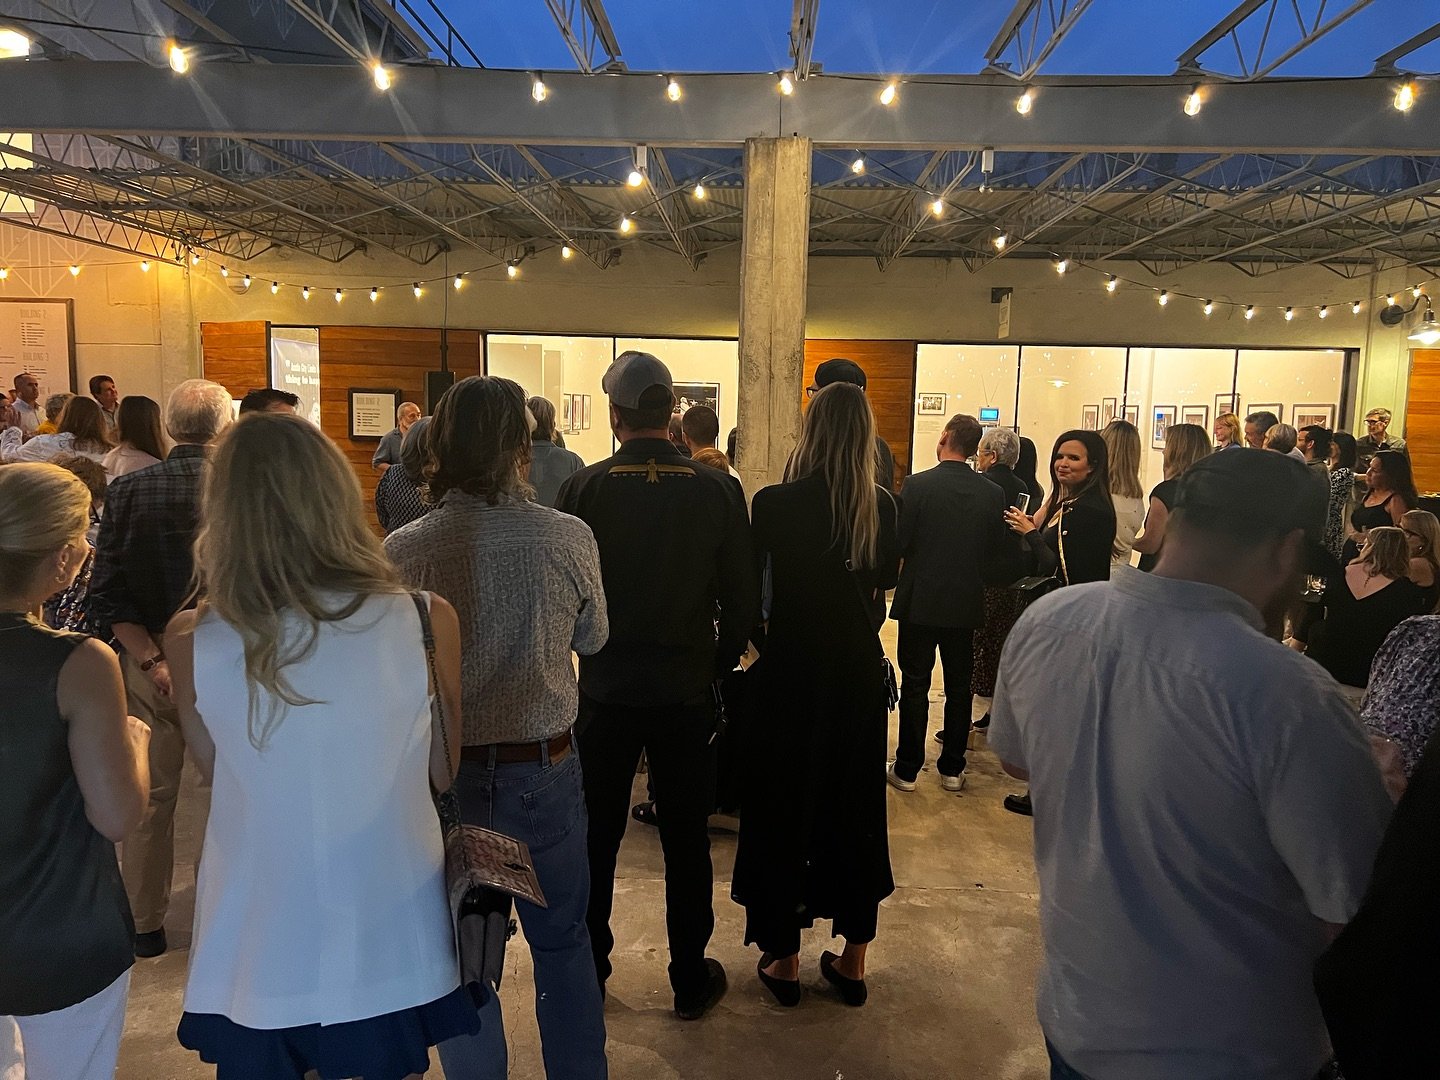 A wonderful turnout at @canopyprojects.512 for the Austin City Limits Heritage Collection Opening Reception last week ✨ A very special release of local Photographer Scott Newton&rsquo;s work with @acltv documenting decades of iconic musicians @austin